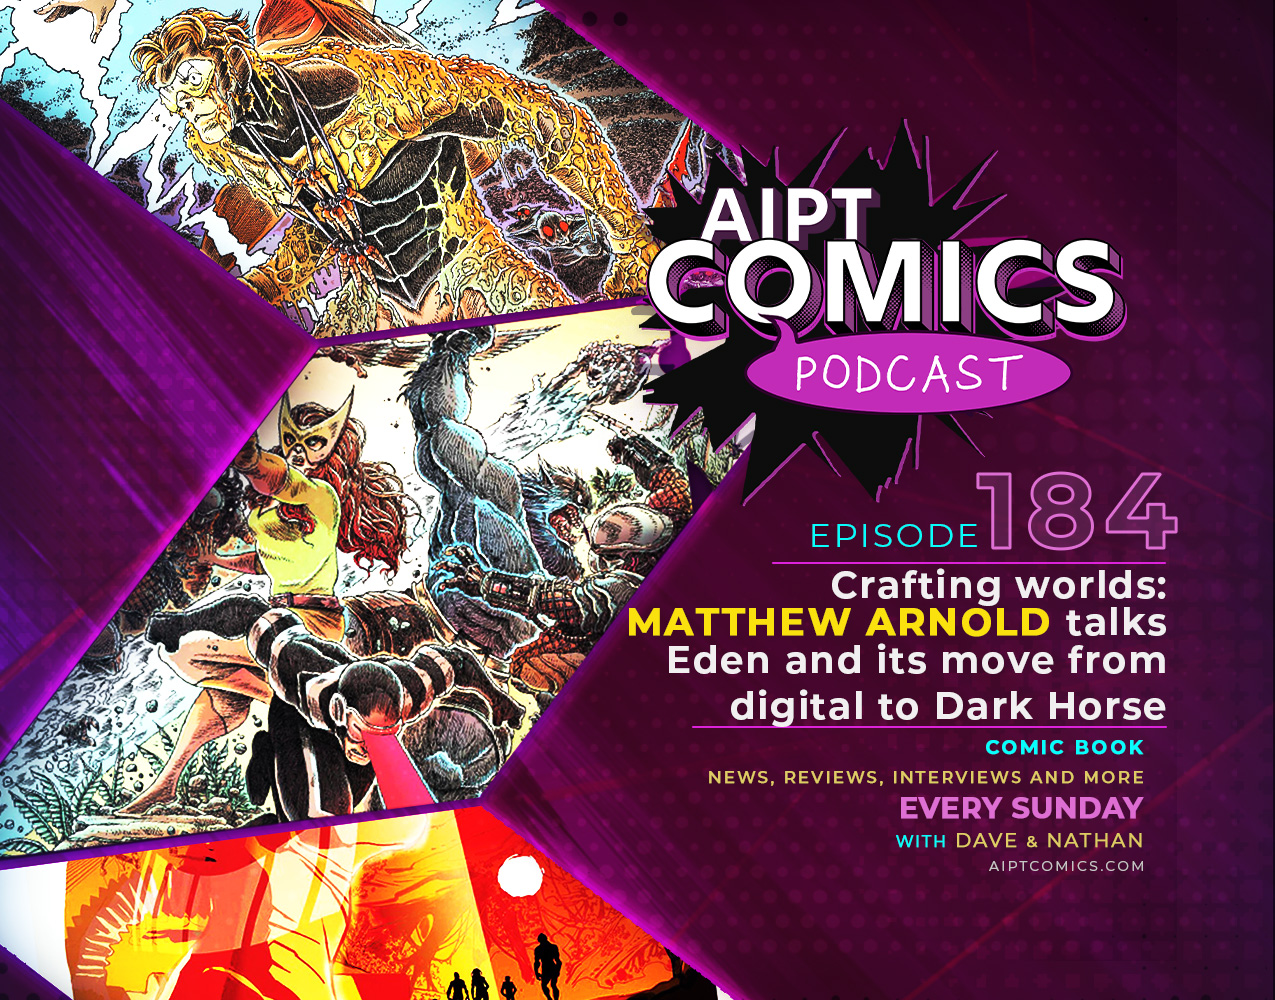 AIPT Comics Podcast Episode 184: Crafting worlds: Matthew Arnold talks 'Eden' and its move from digital to Dark Horse